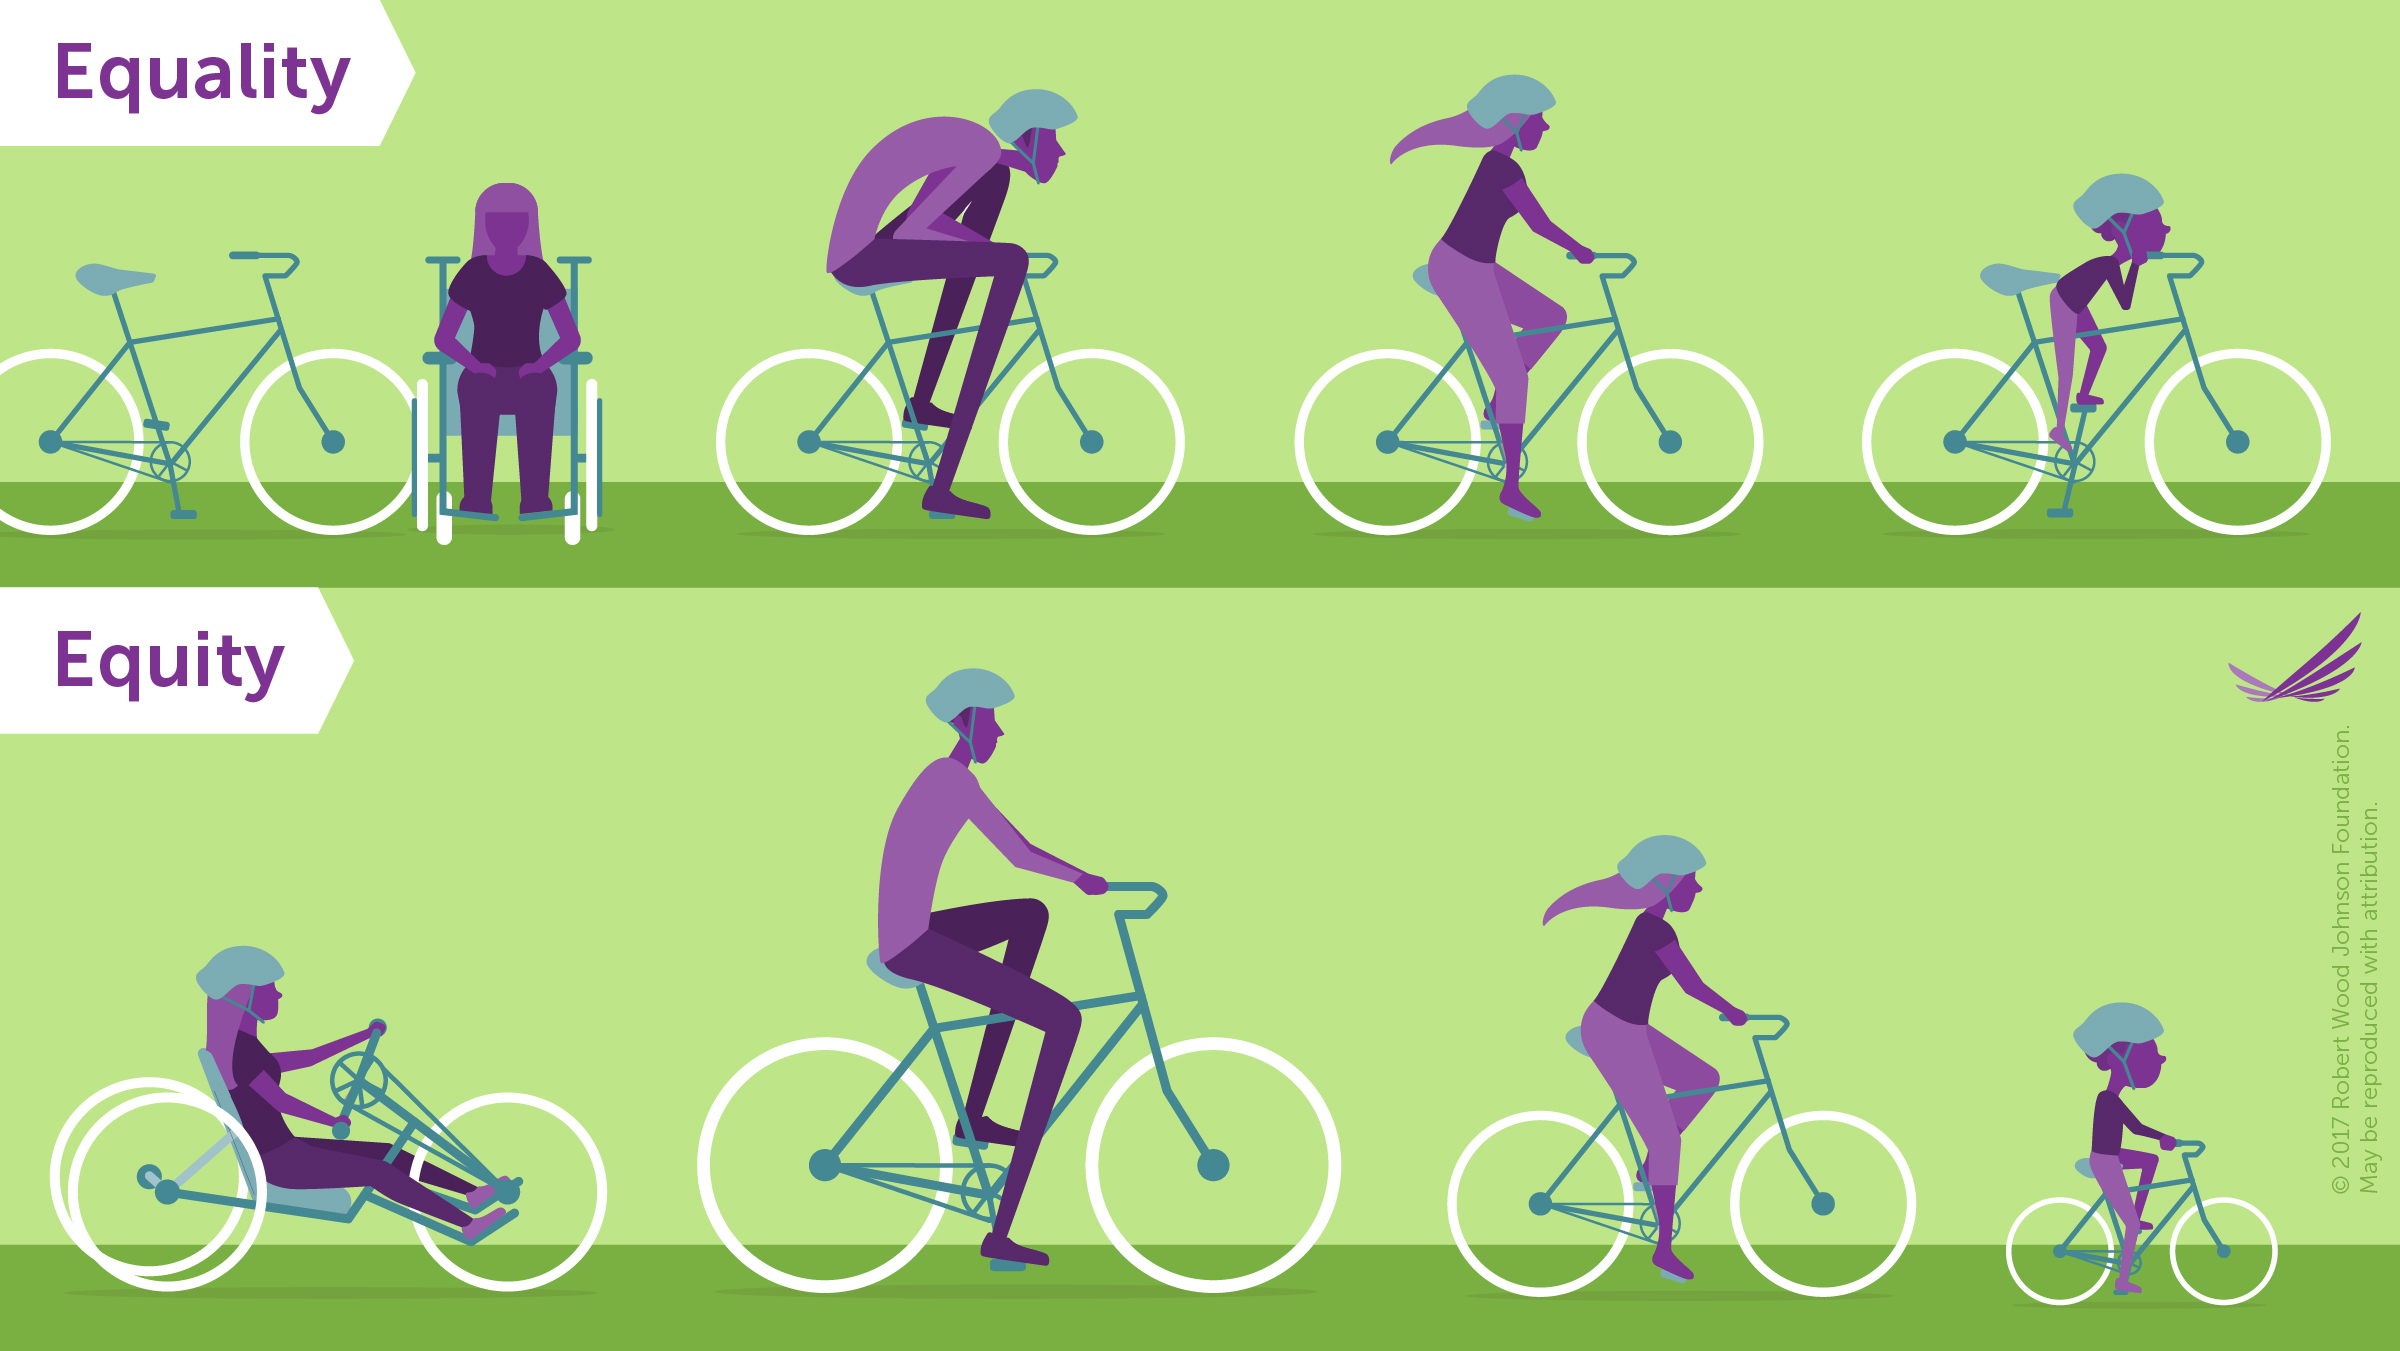 Picture of bicycles showing difference between equity and equality